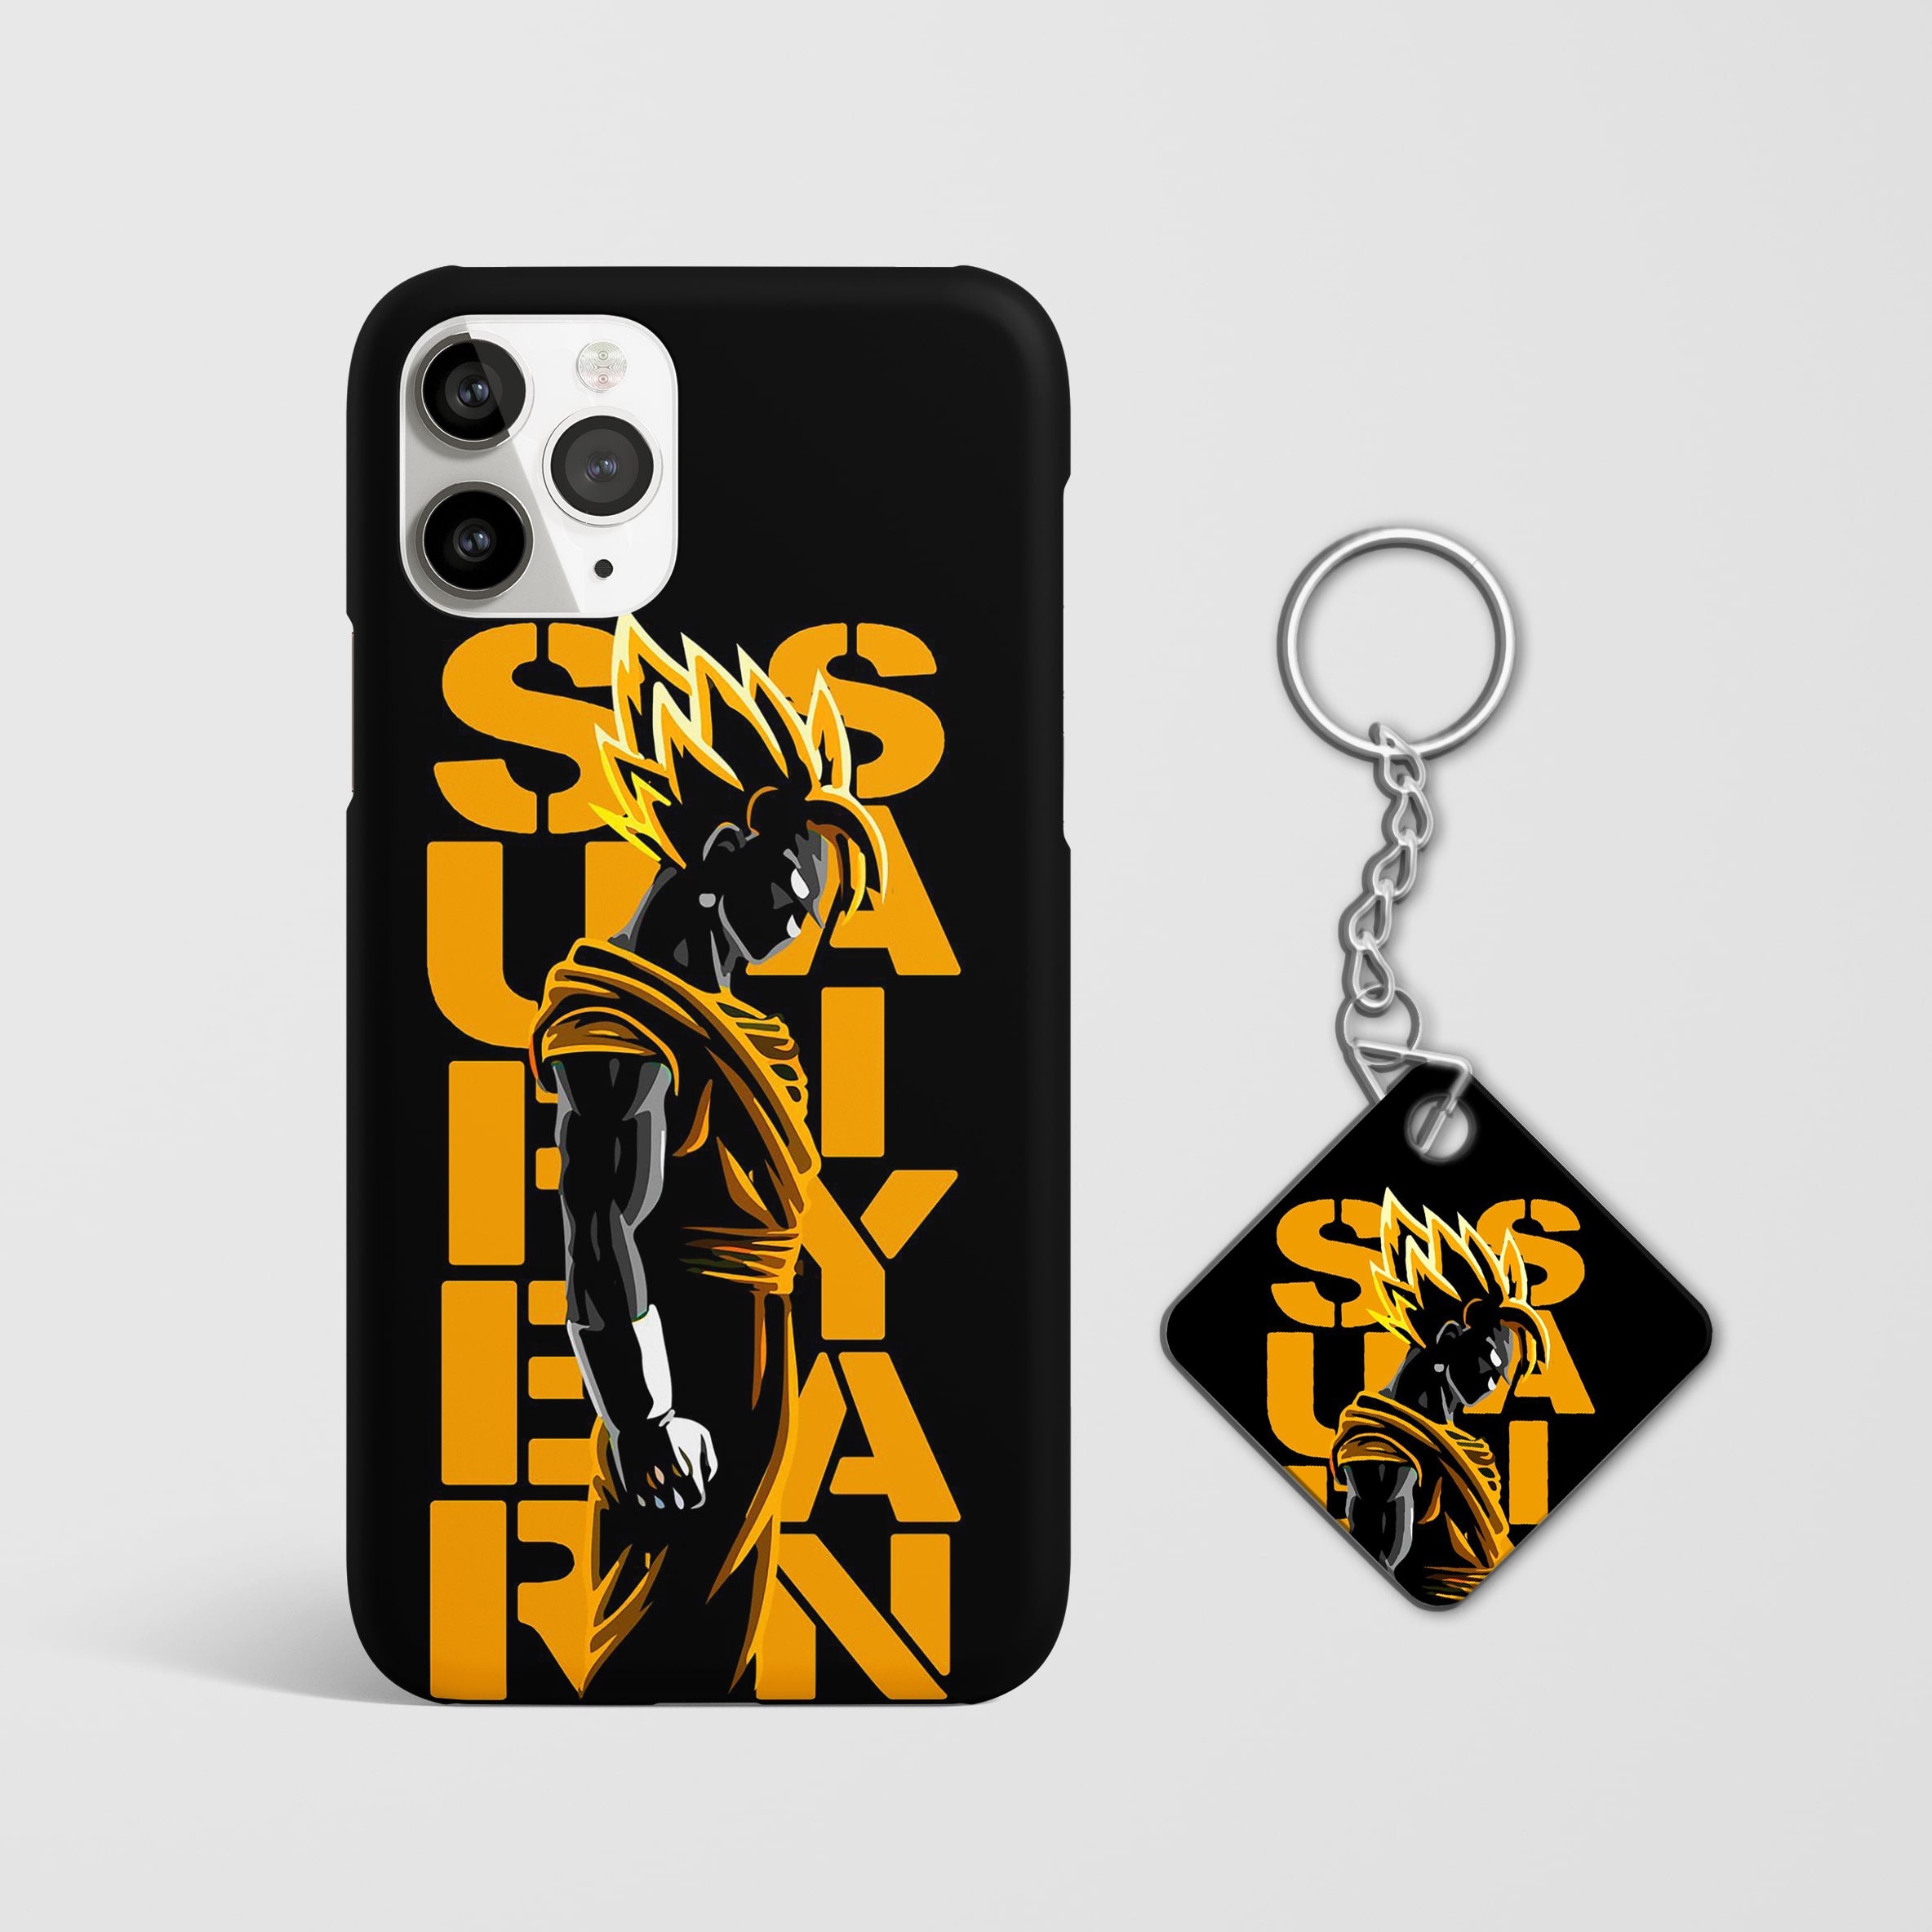 Close-up of Super Saiyan power unleashed on a phone case with Keychain.